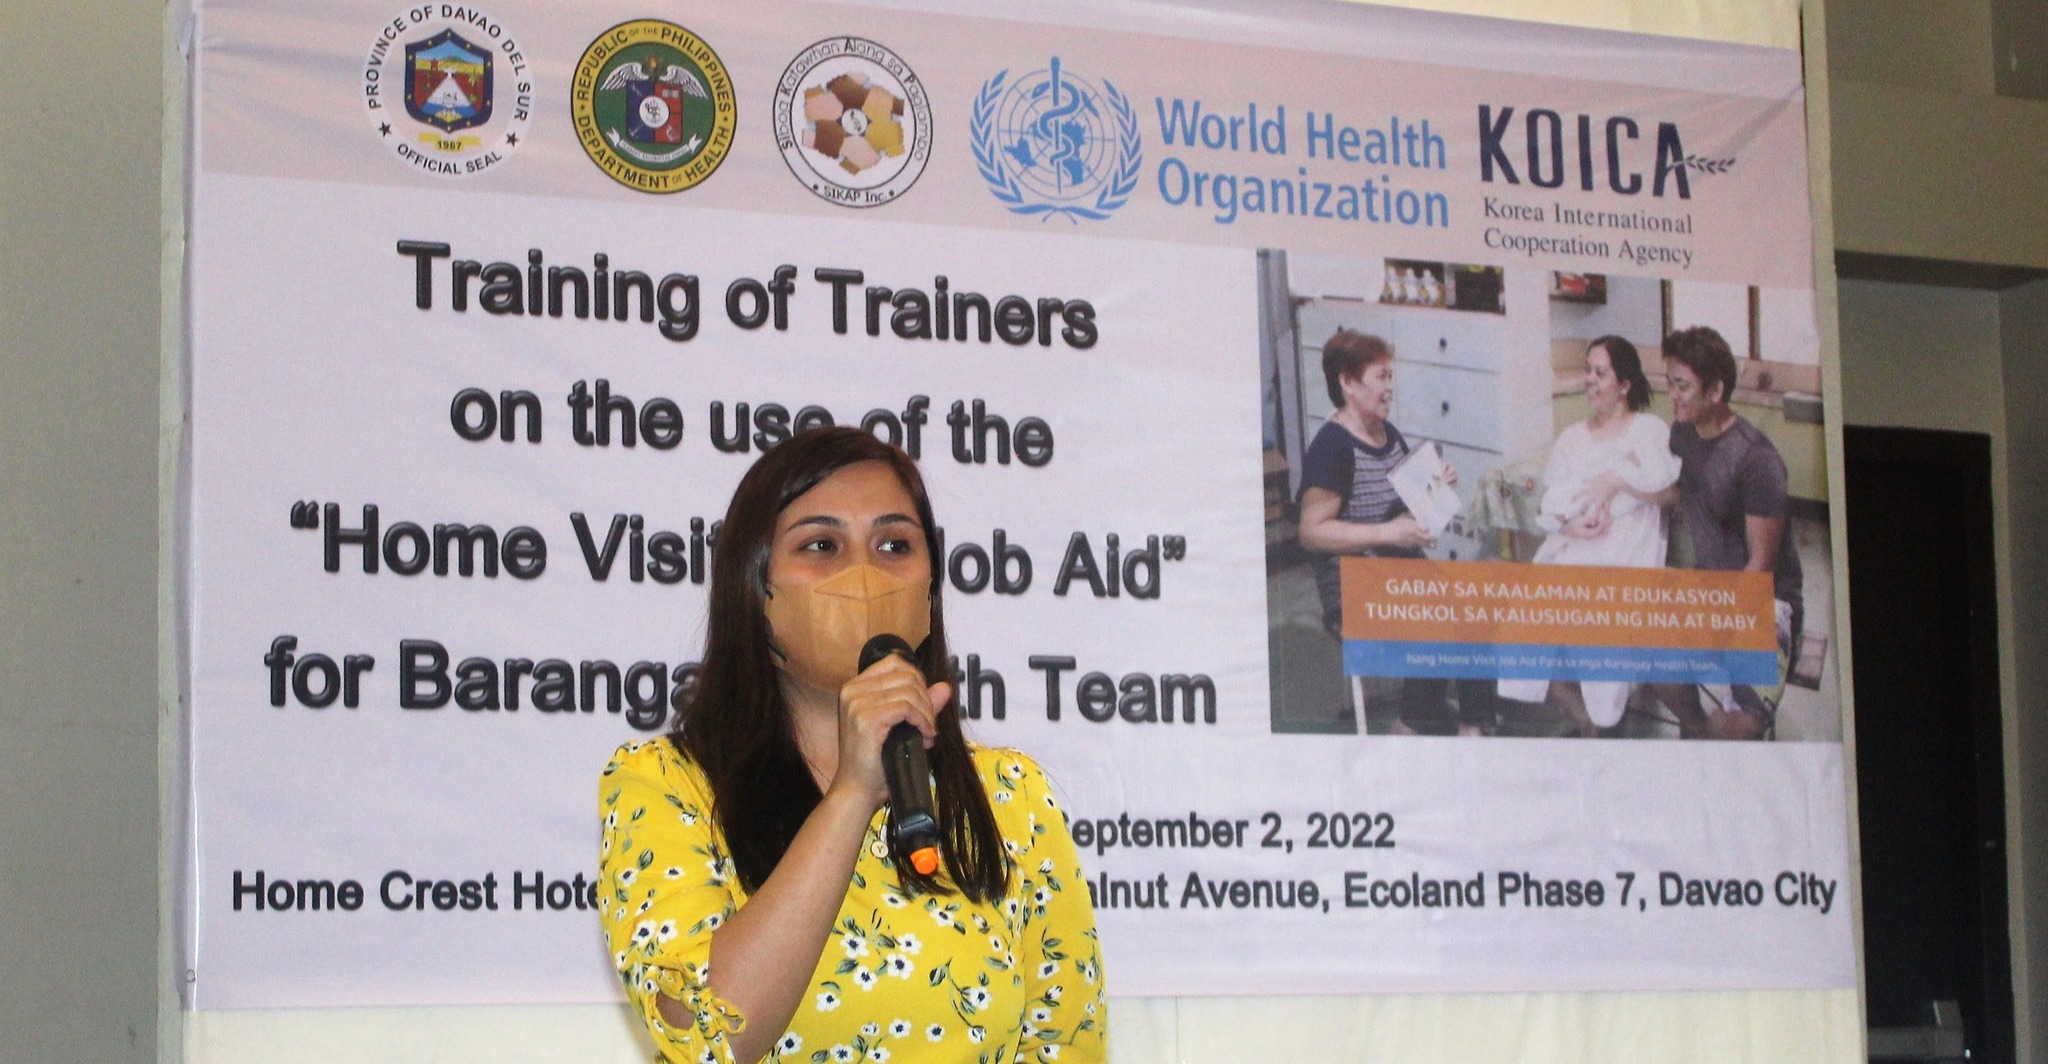 In Davao Region, Training of Primary Health Care (PHC) Team on IEC Toolkit/Job Aid Tool were conducted